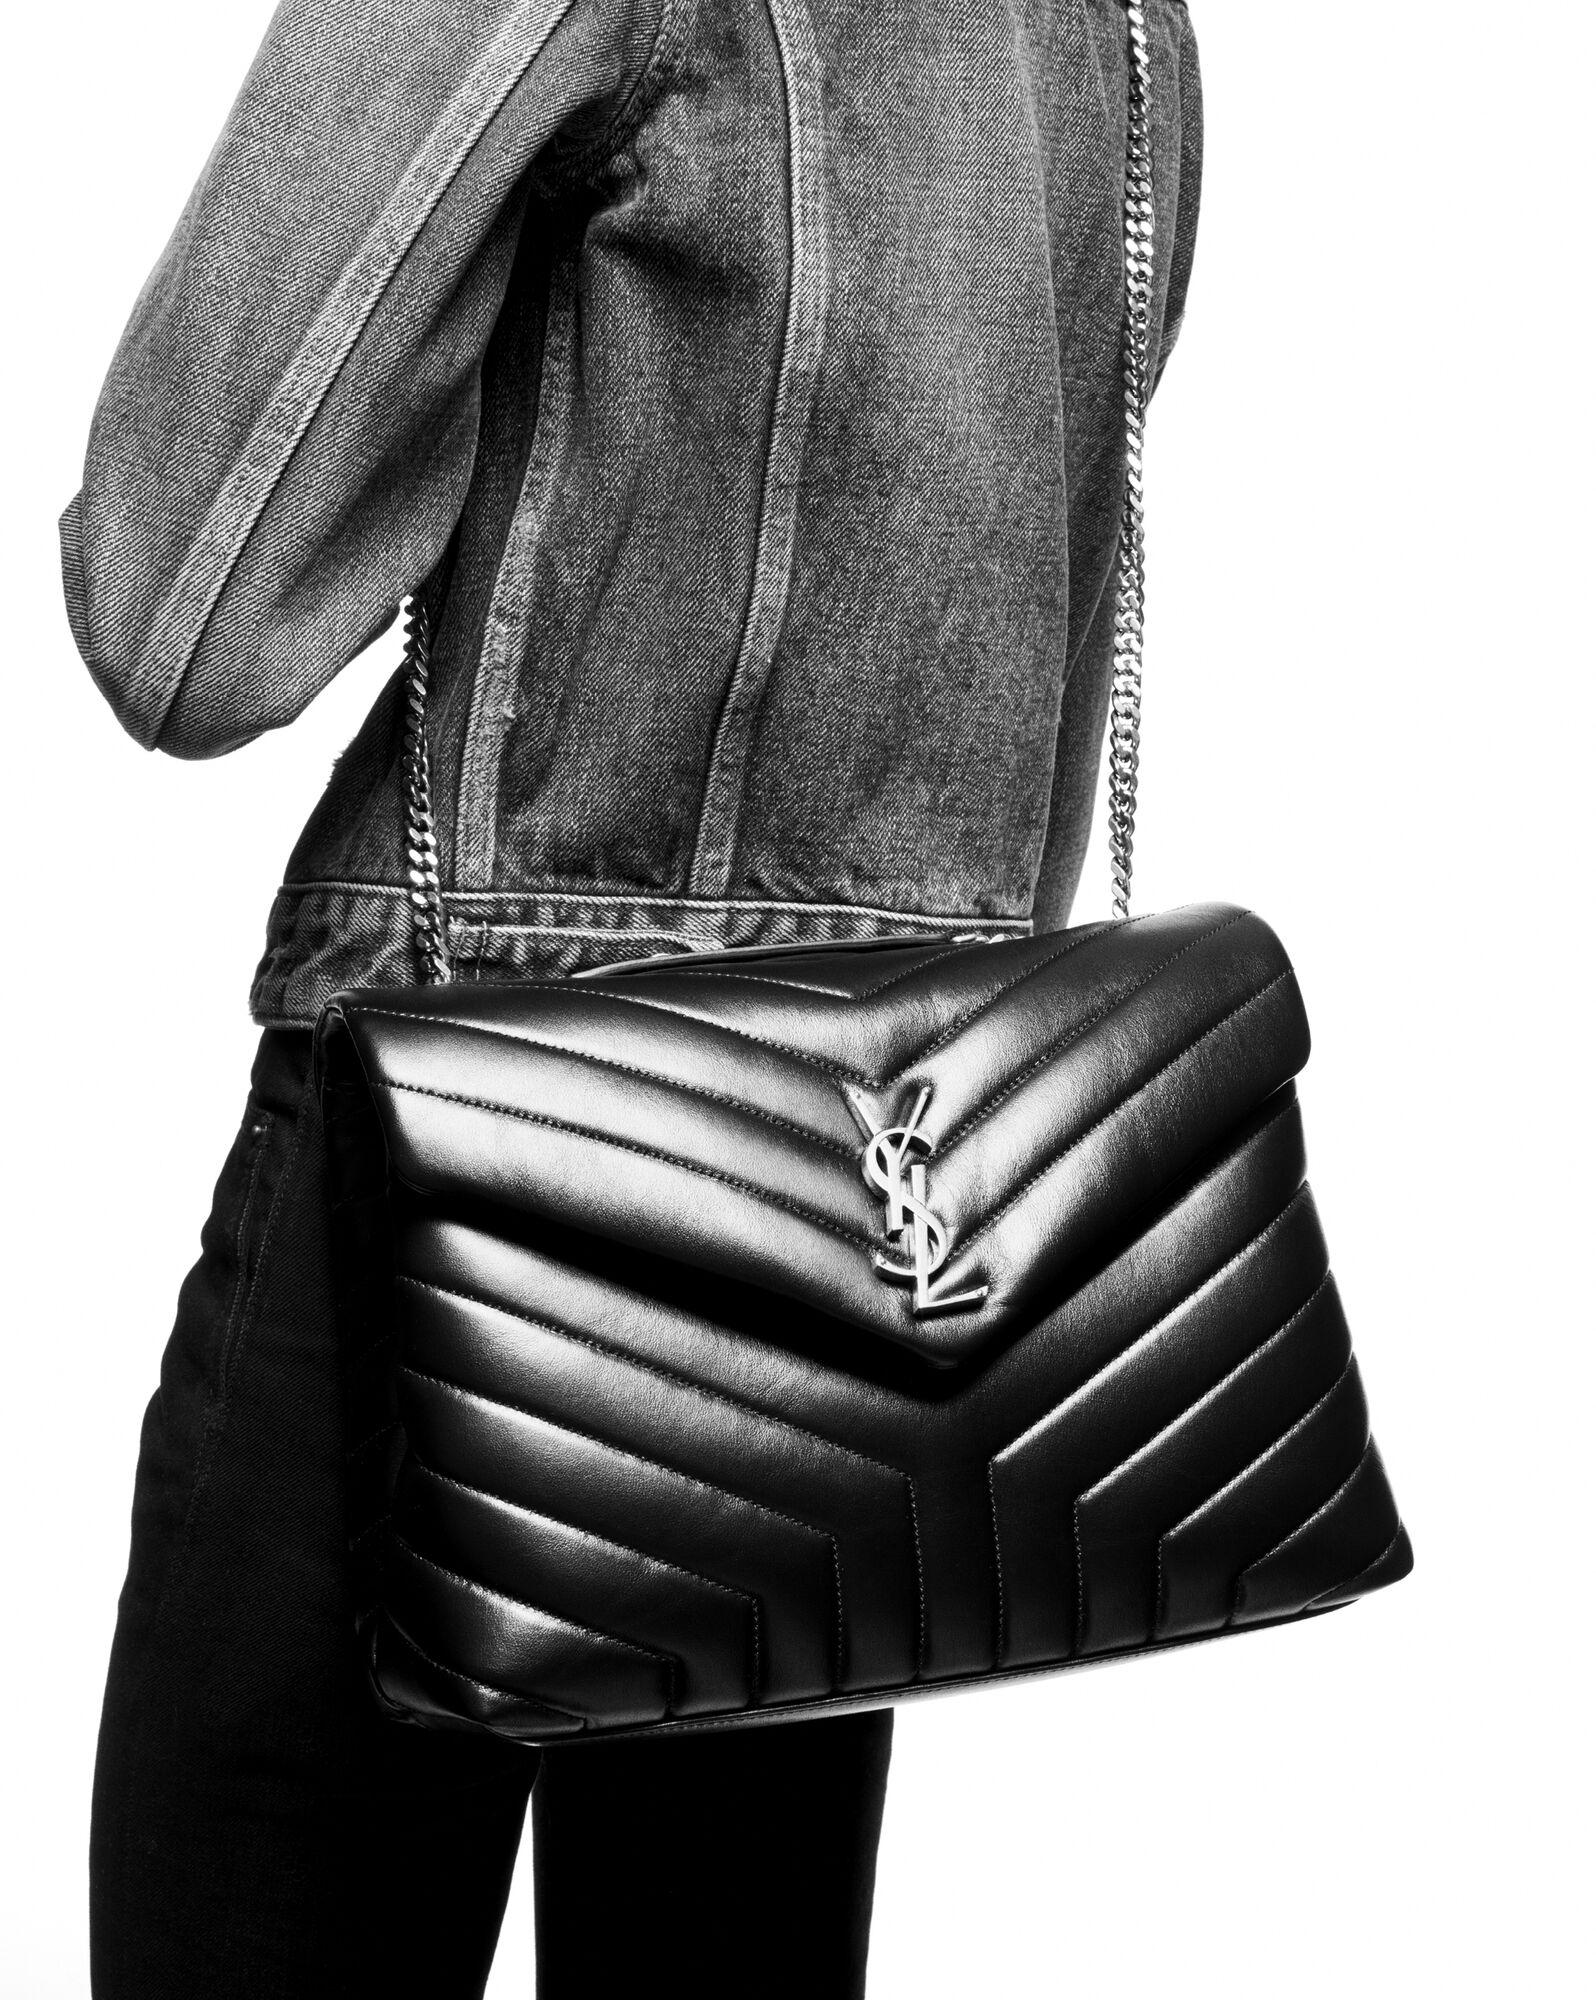 Loulou Quilted Leather YSL Bag